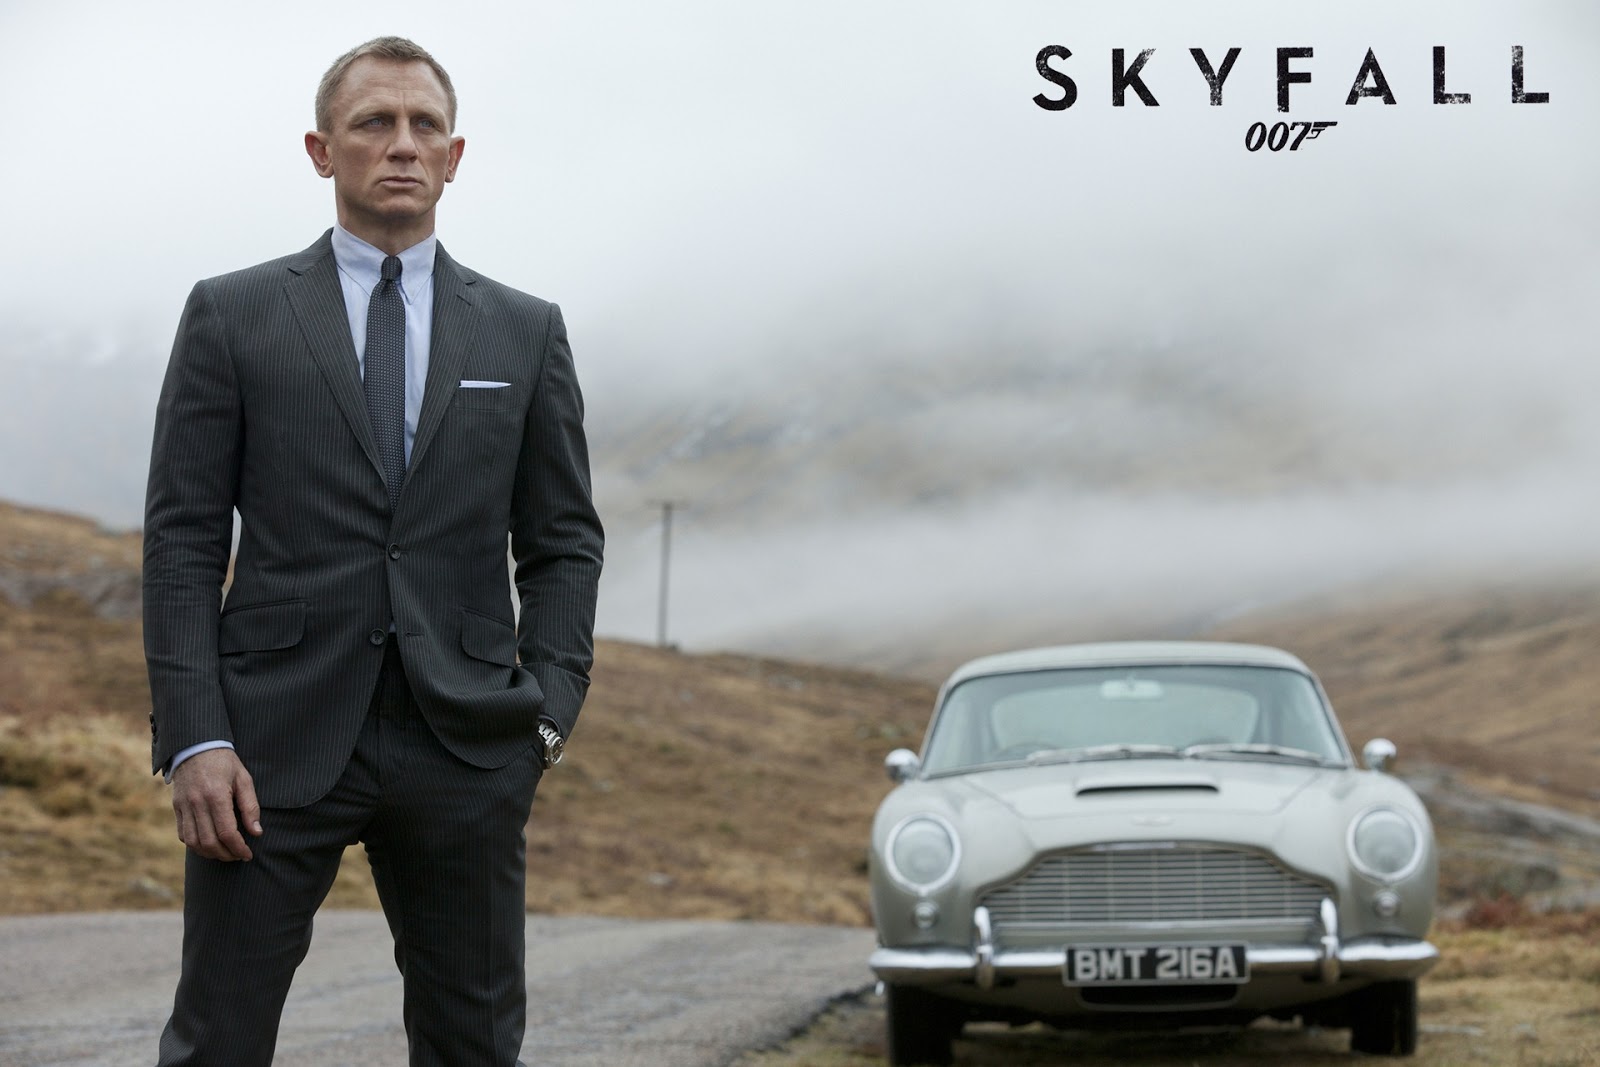 HD Wallpapers for iPhone 5 - James Bond 007 Skyfall Wallpapers | Free ...